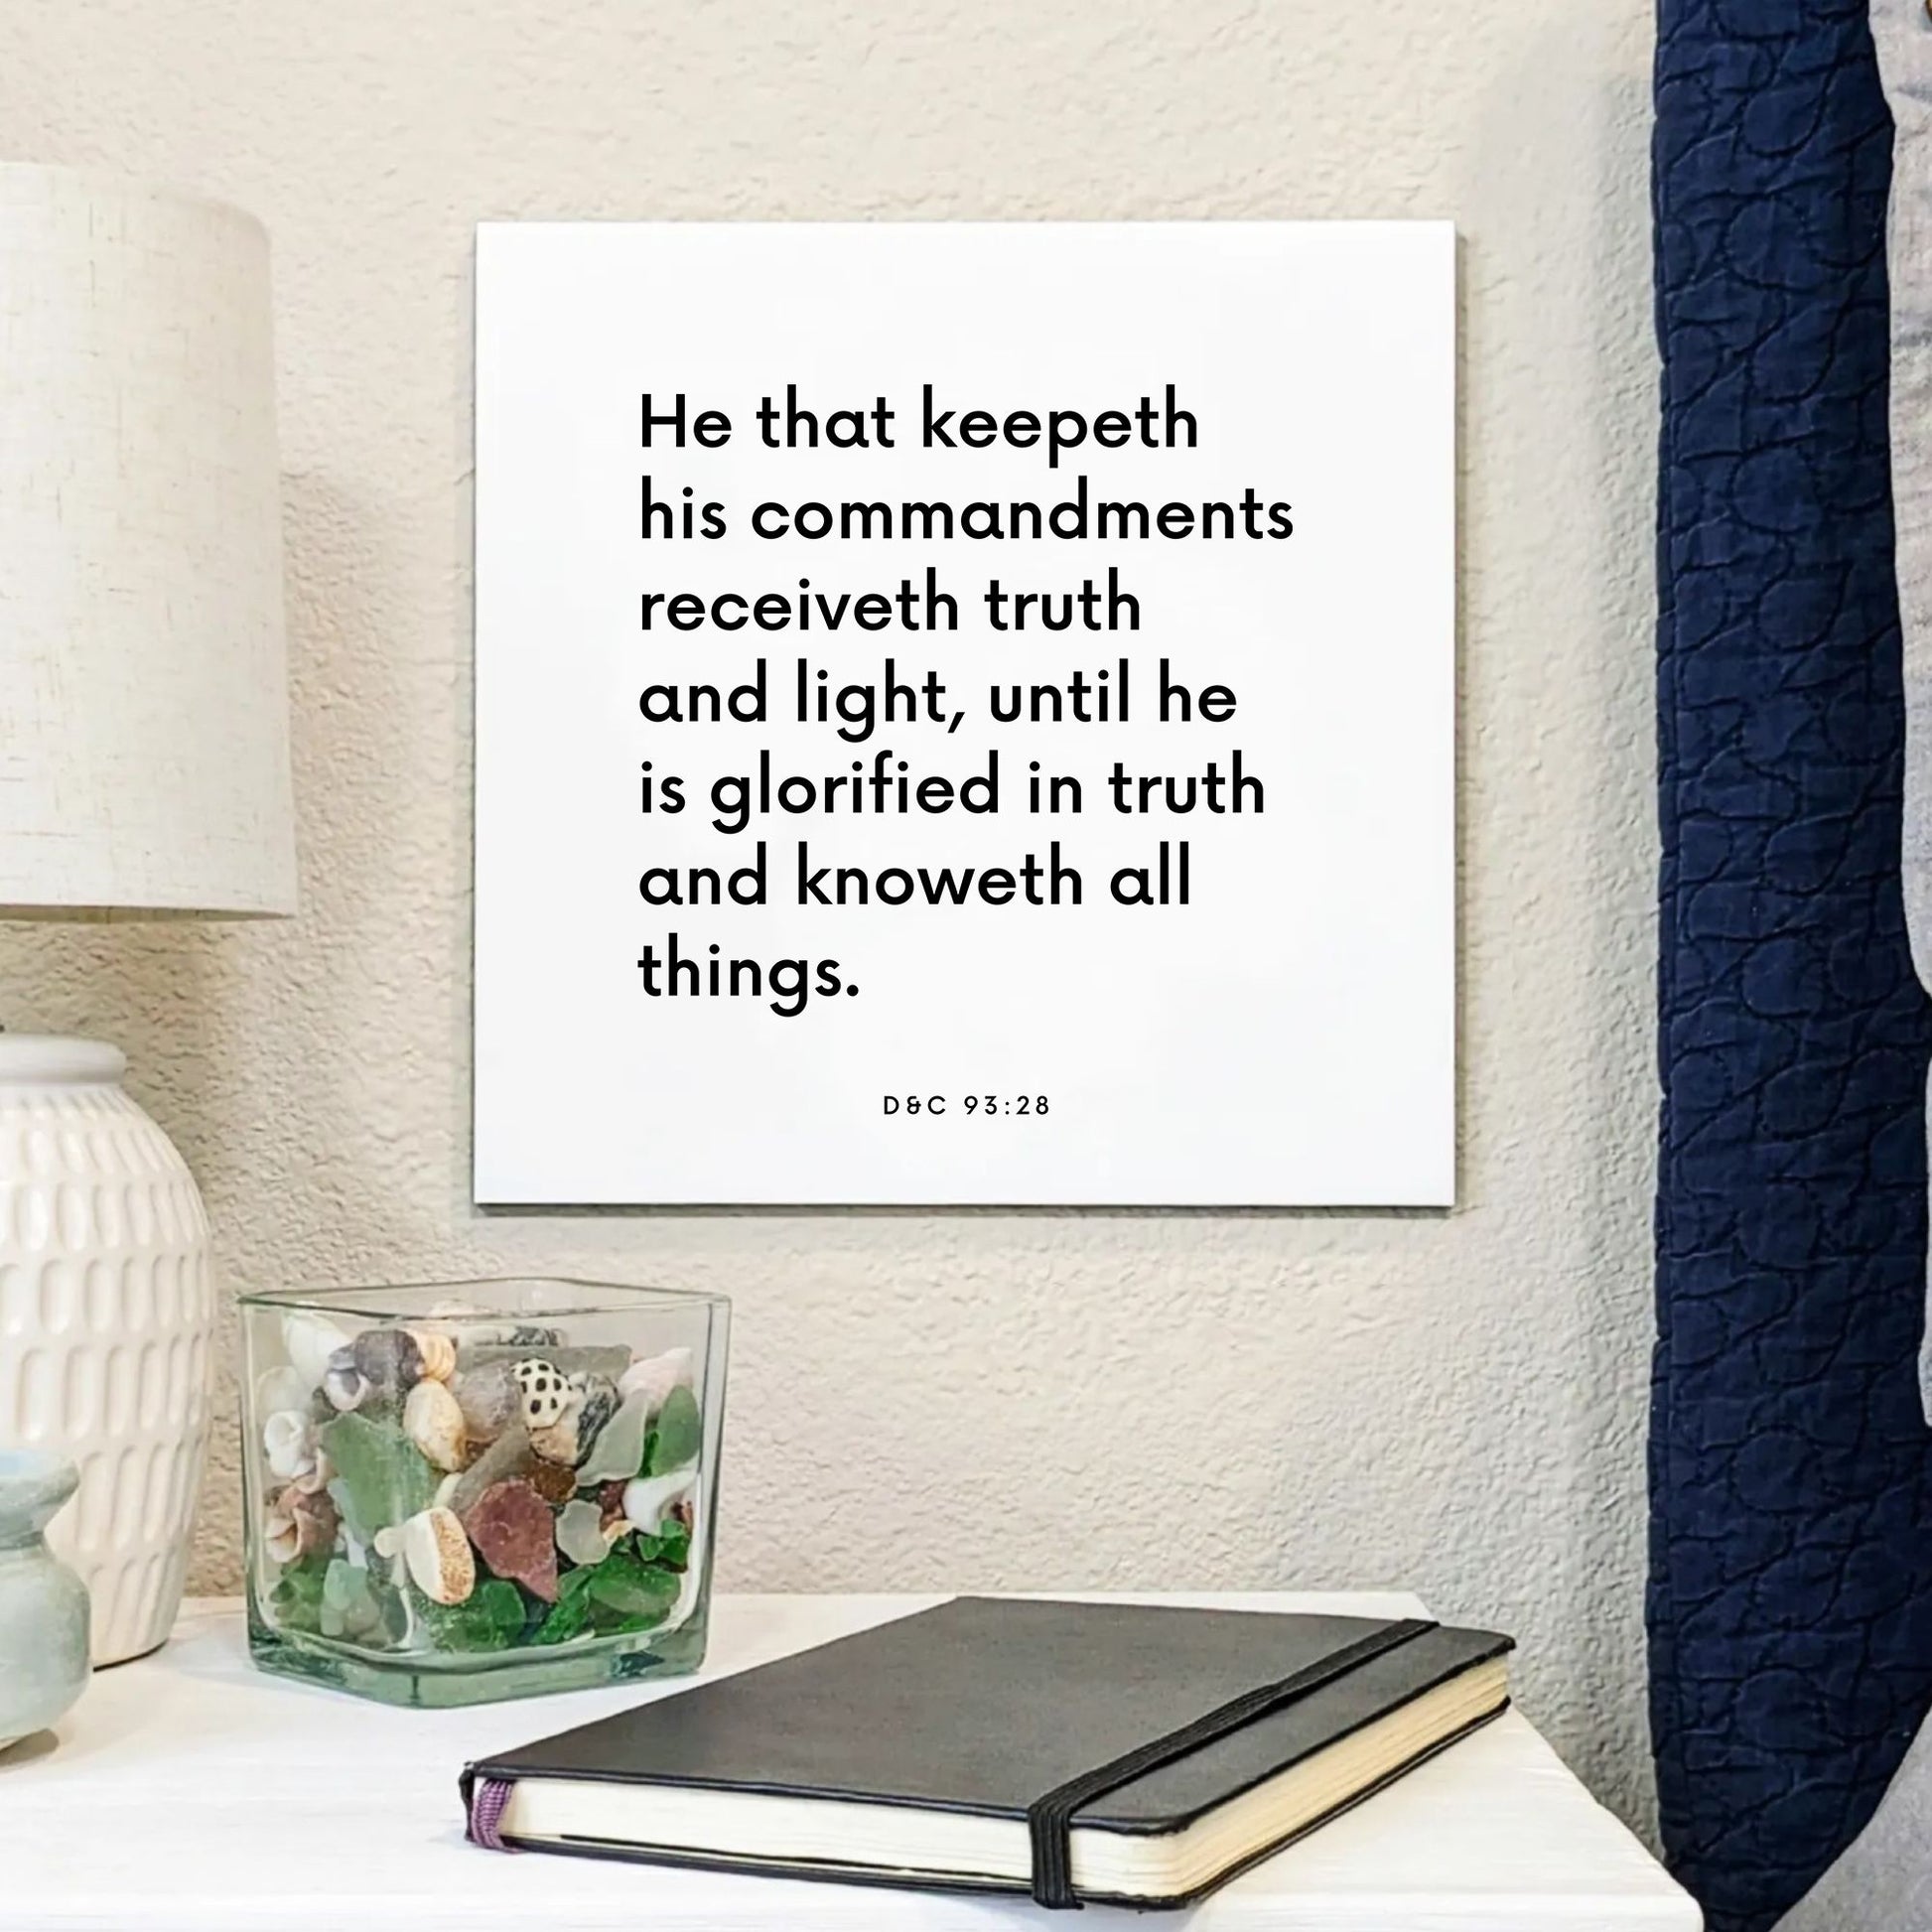 Bedside mouting of the scripture tile for D&C 93:28 - "He that keepeth his commandments receiveth truth and light"